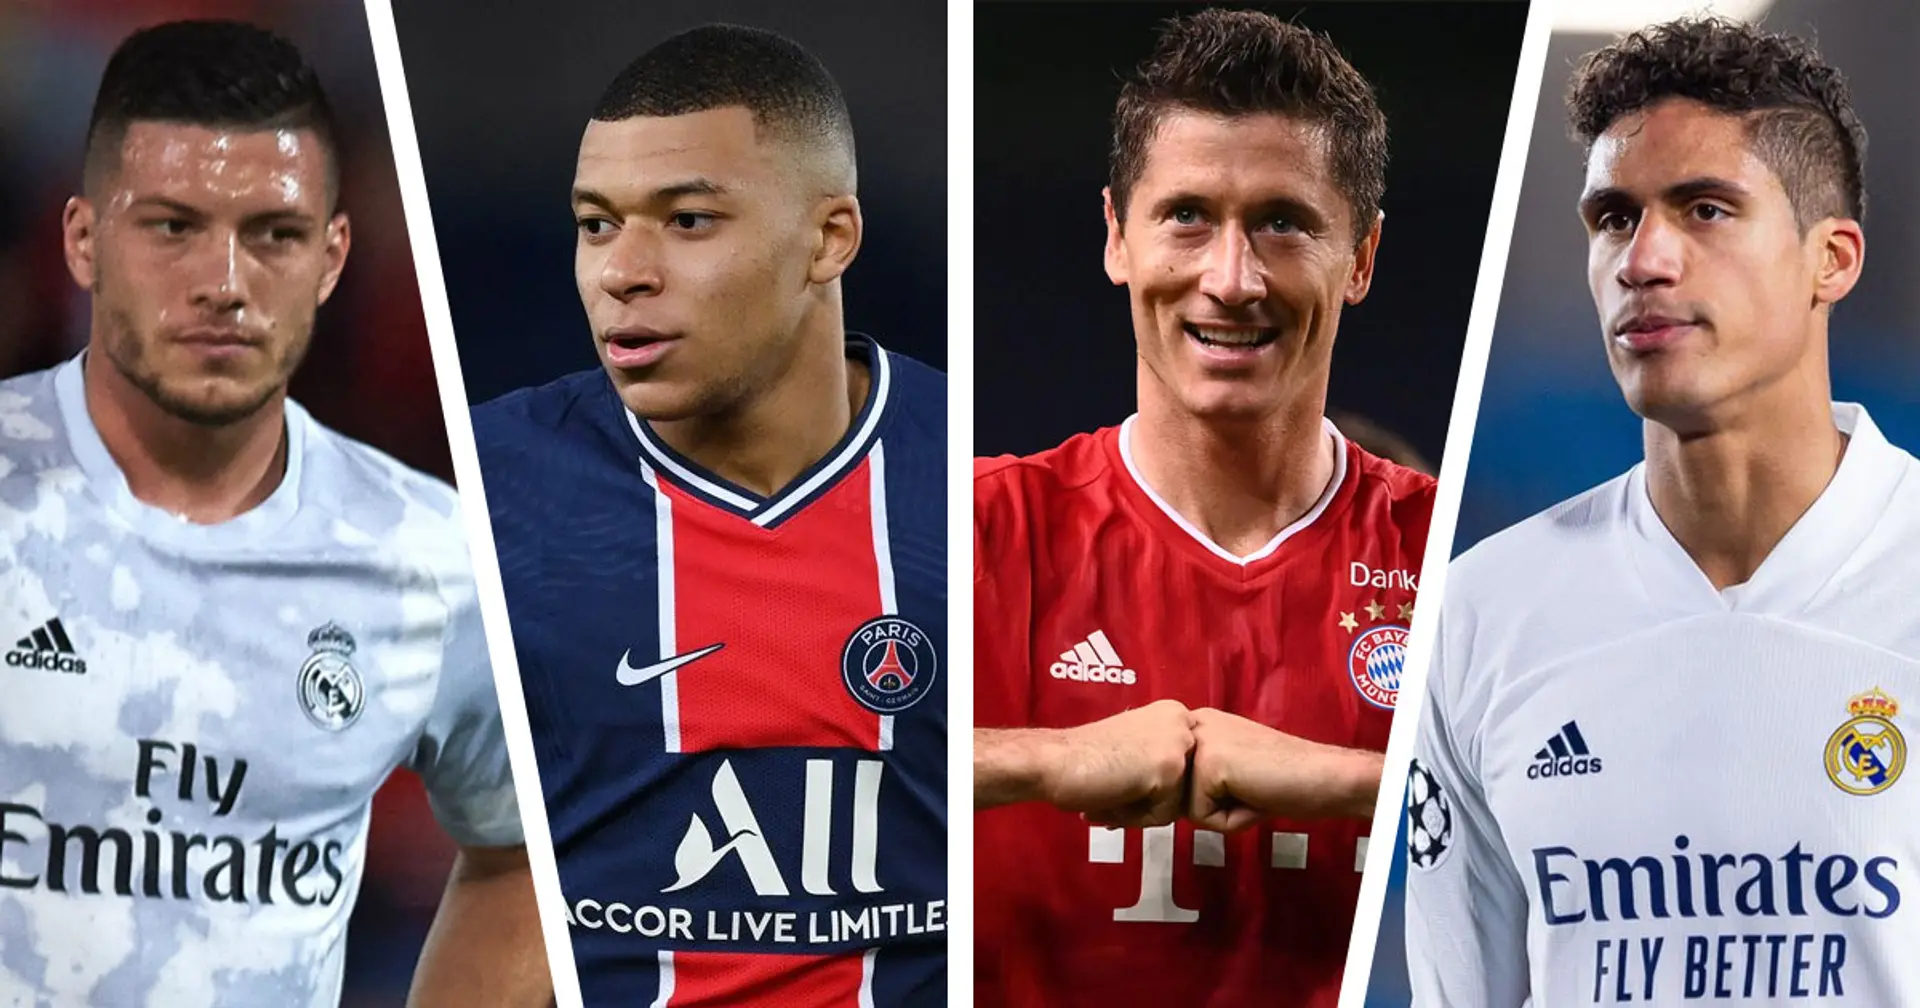 Mbappe, Lewandowski & 4 more names in Real Madrid's transfer round-up with probability ratings